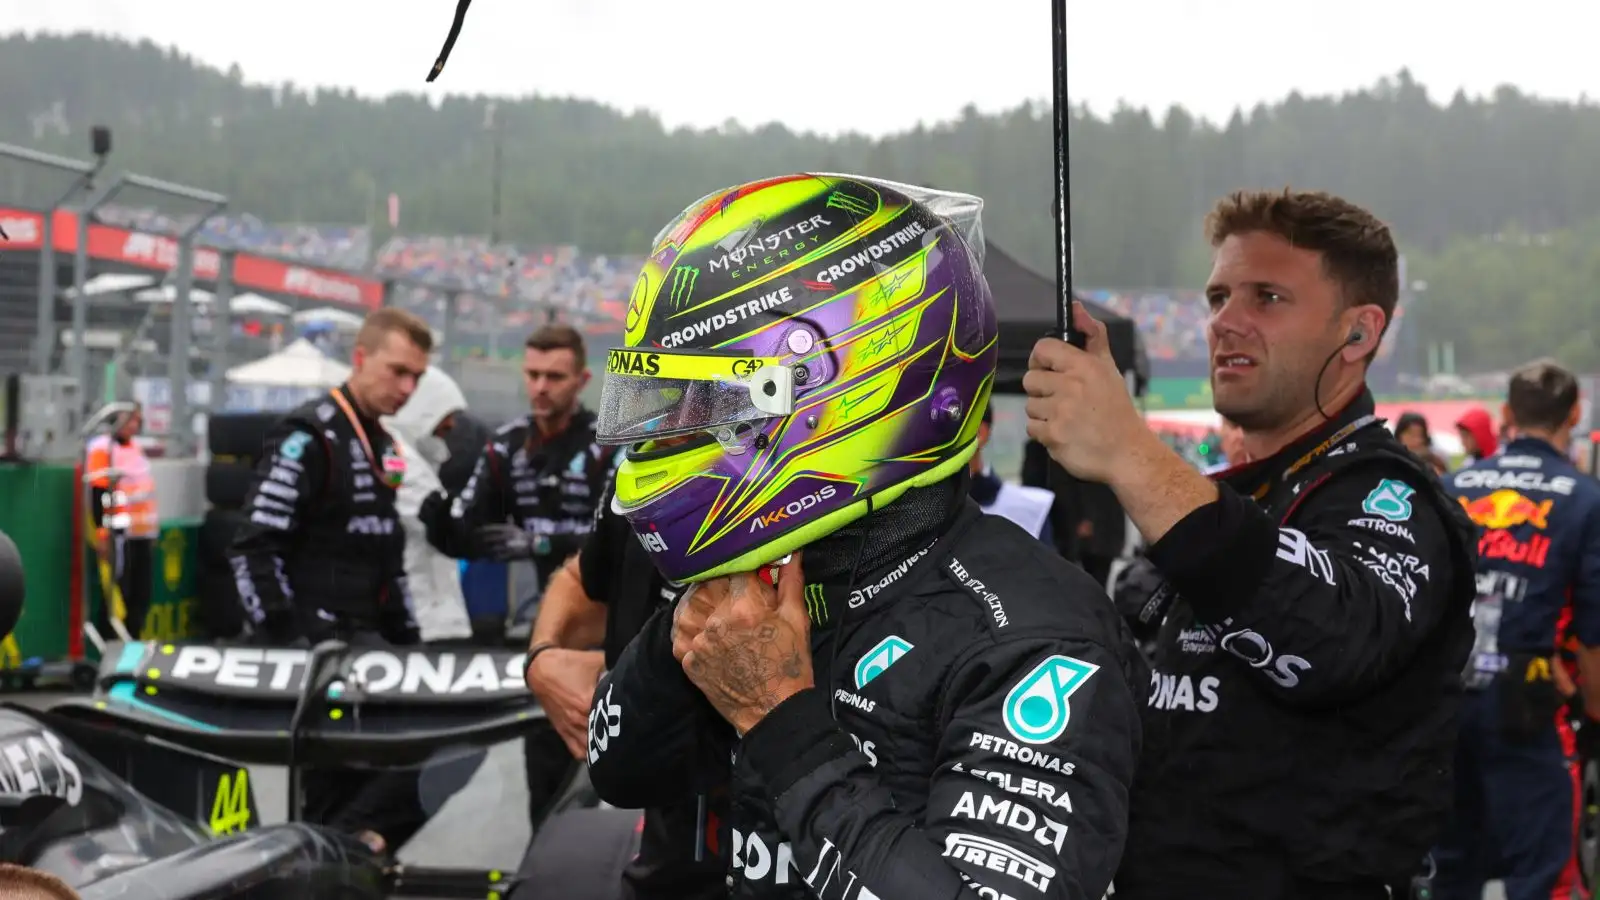 Mercedes driver Lewis Hamilton prepares for the start of the Austrian Grand Prix sprint race. Styria, July 2023.